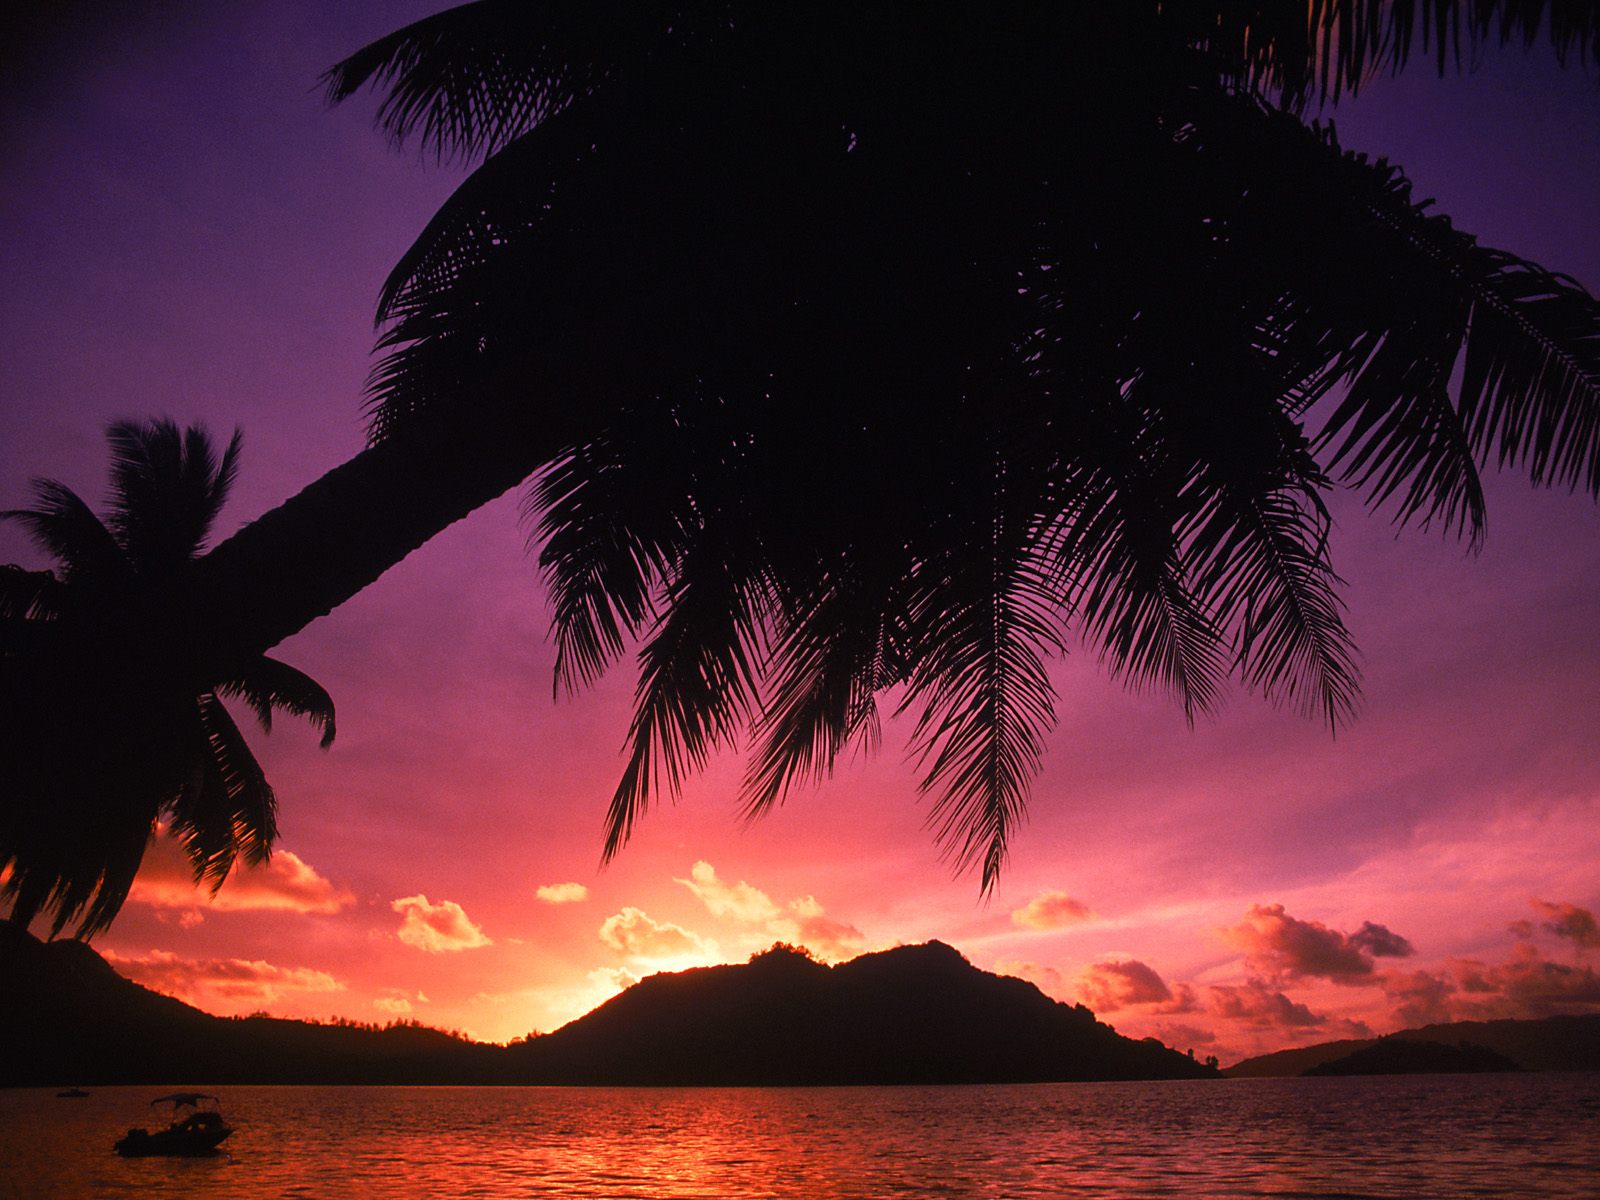 Tropical Beach at Sunset The Seychelles